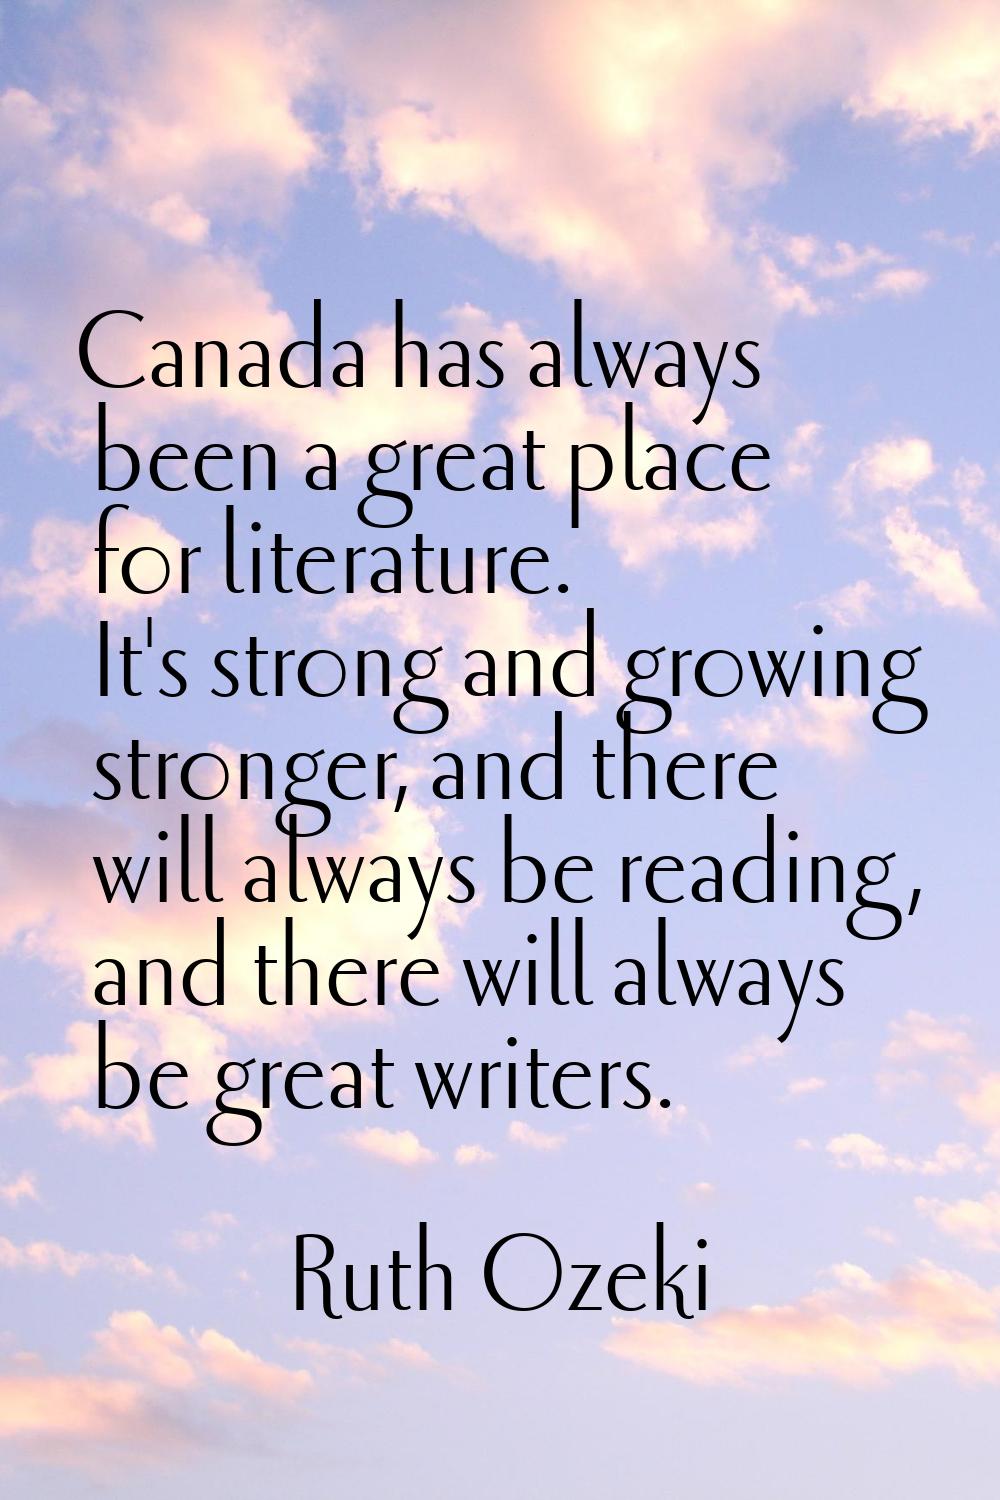 Canada has always been a great place for literature. It's strong and growing stronger, and there wi